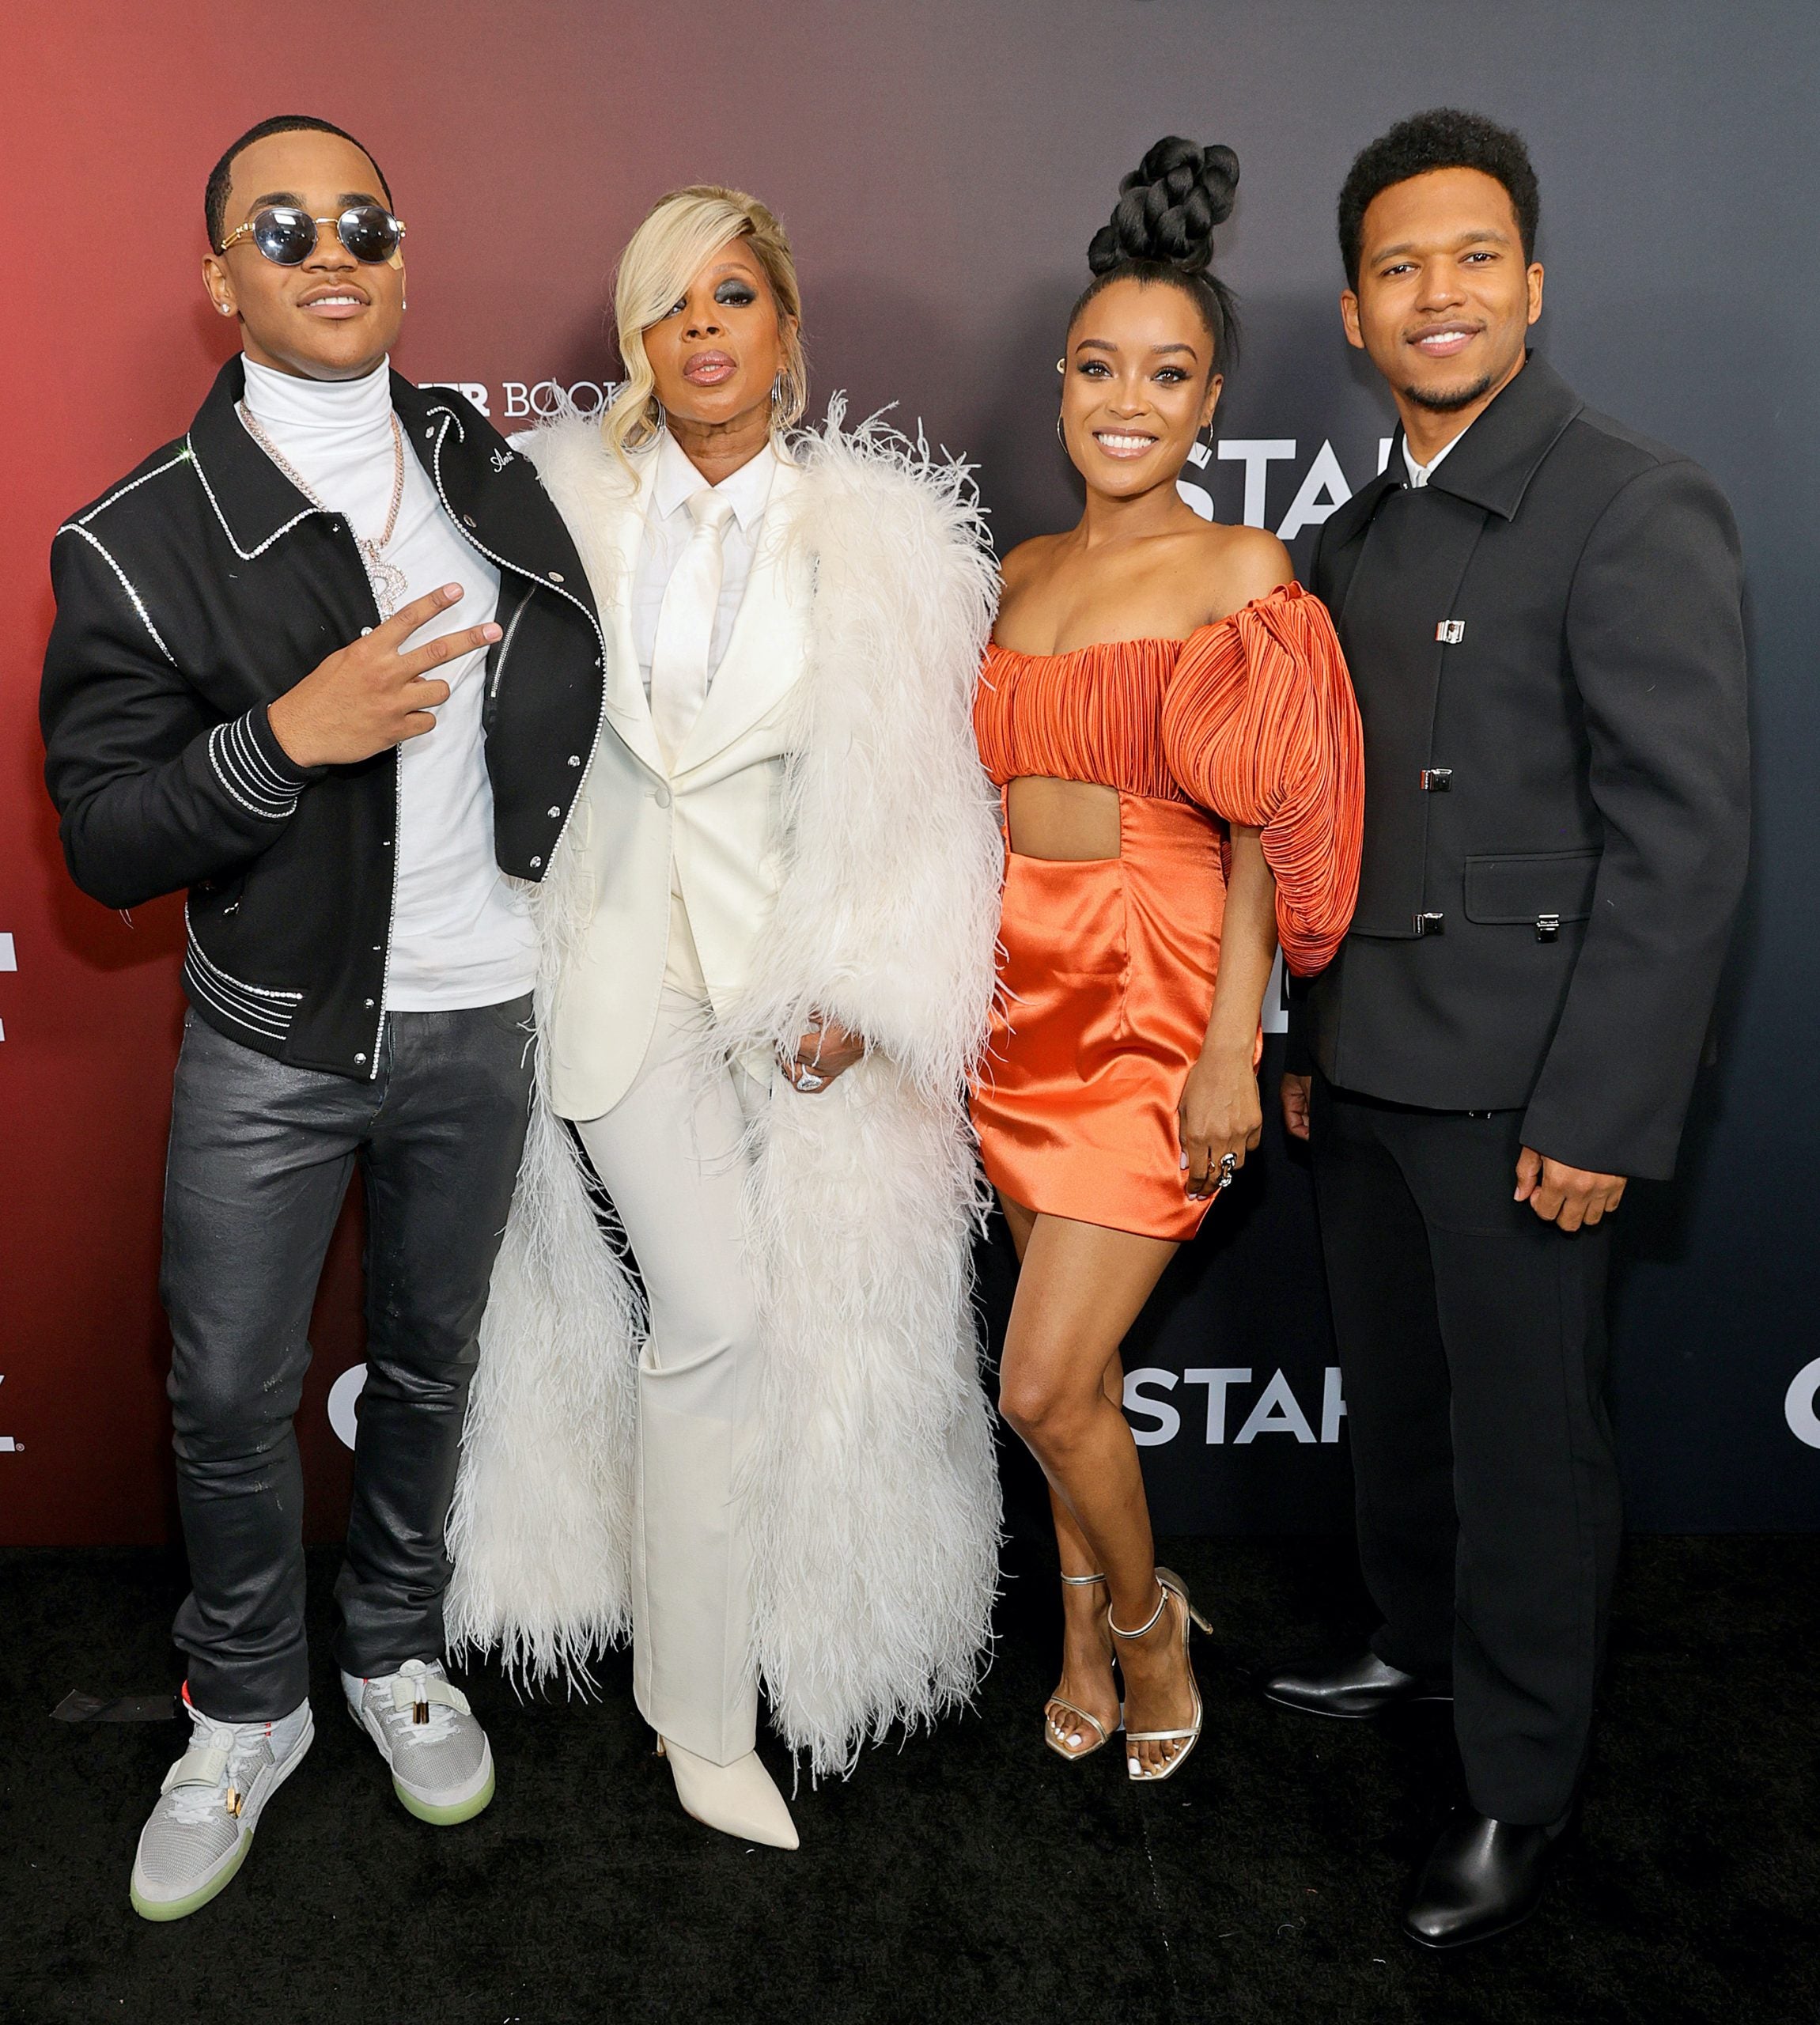 Mary J. Blige On Getting Into Character For 'Power Book II: Ghost